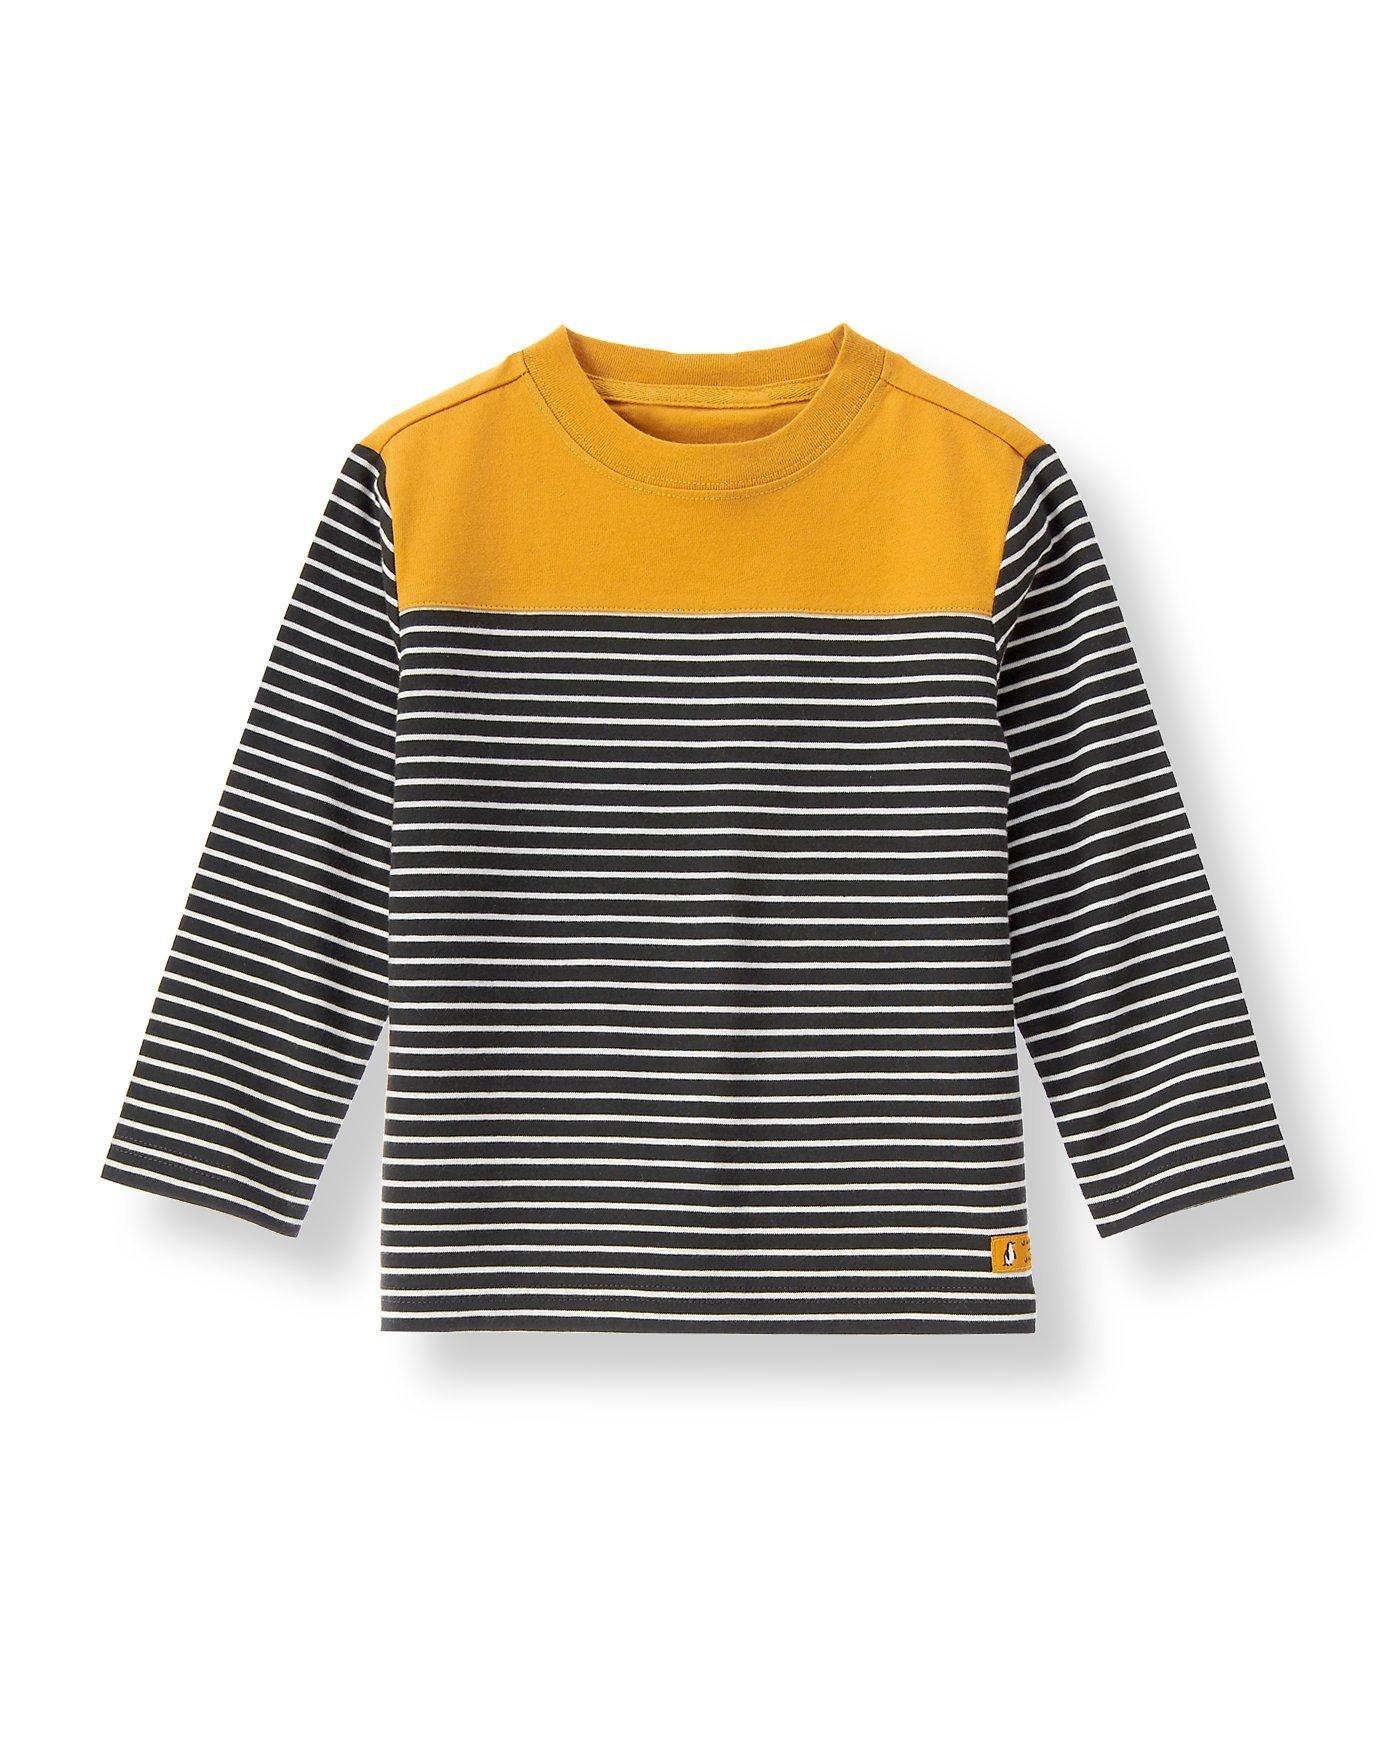 Colorblock Striped Tee image number 0